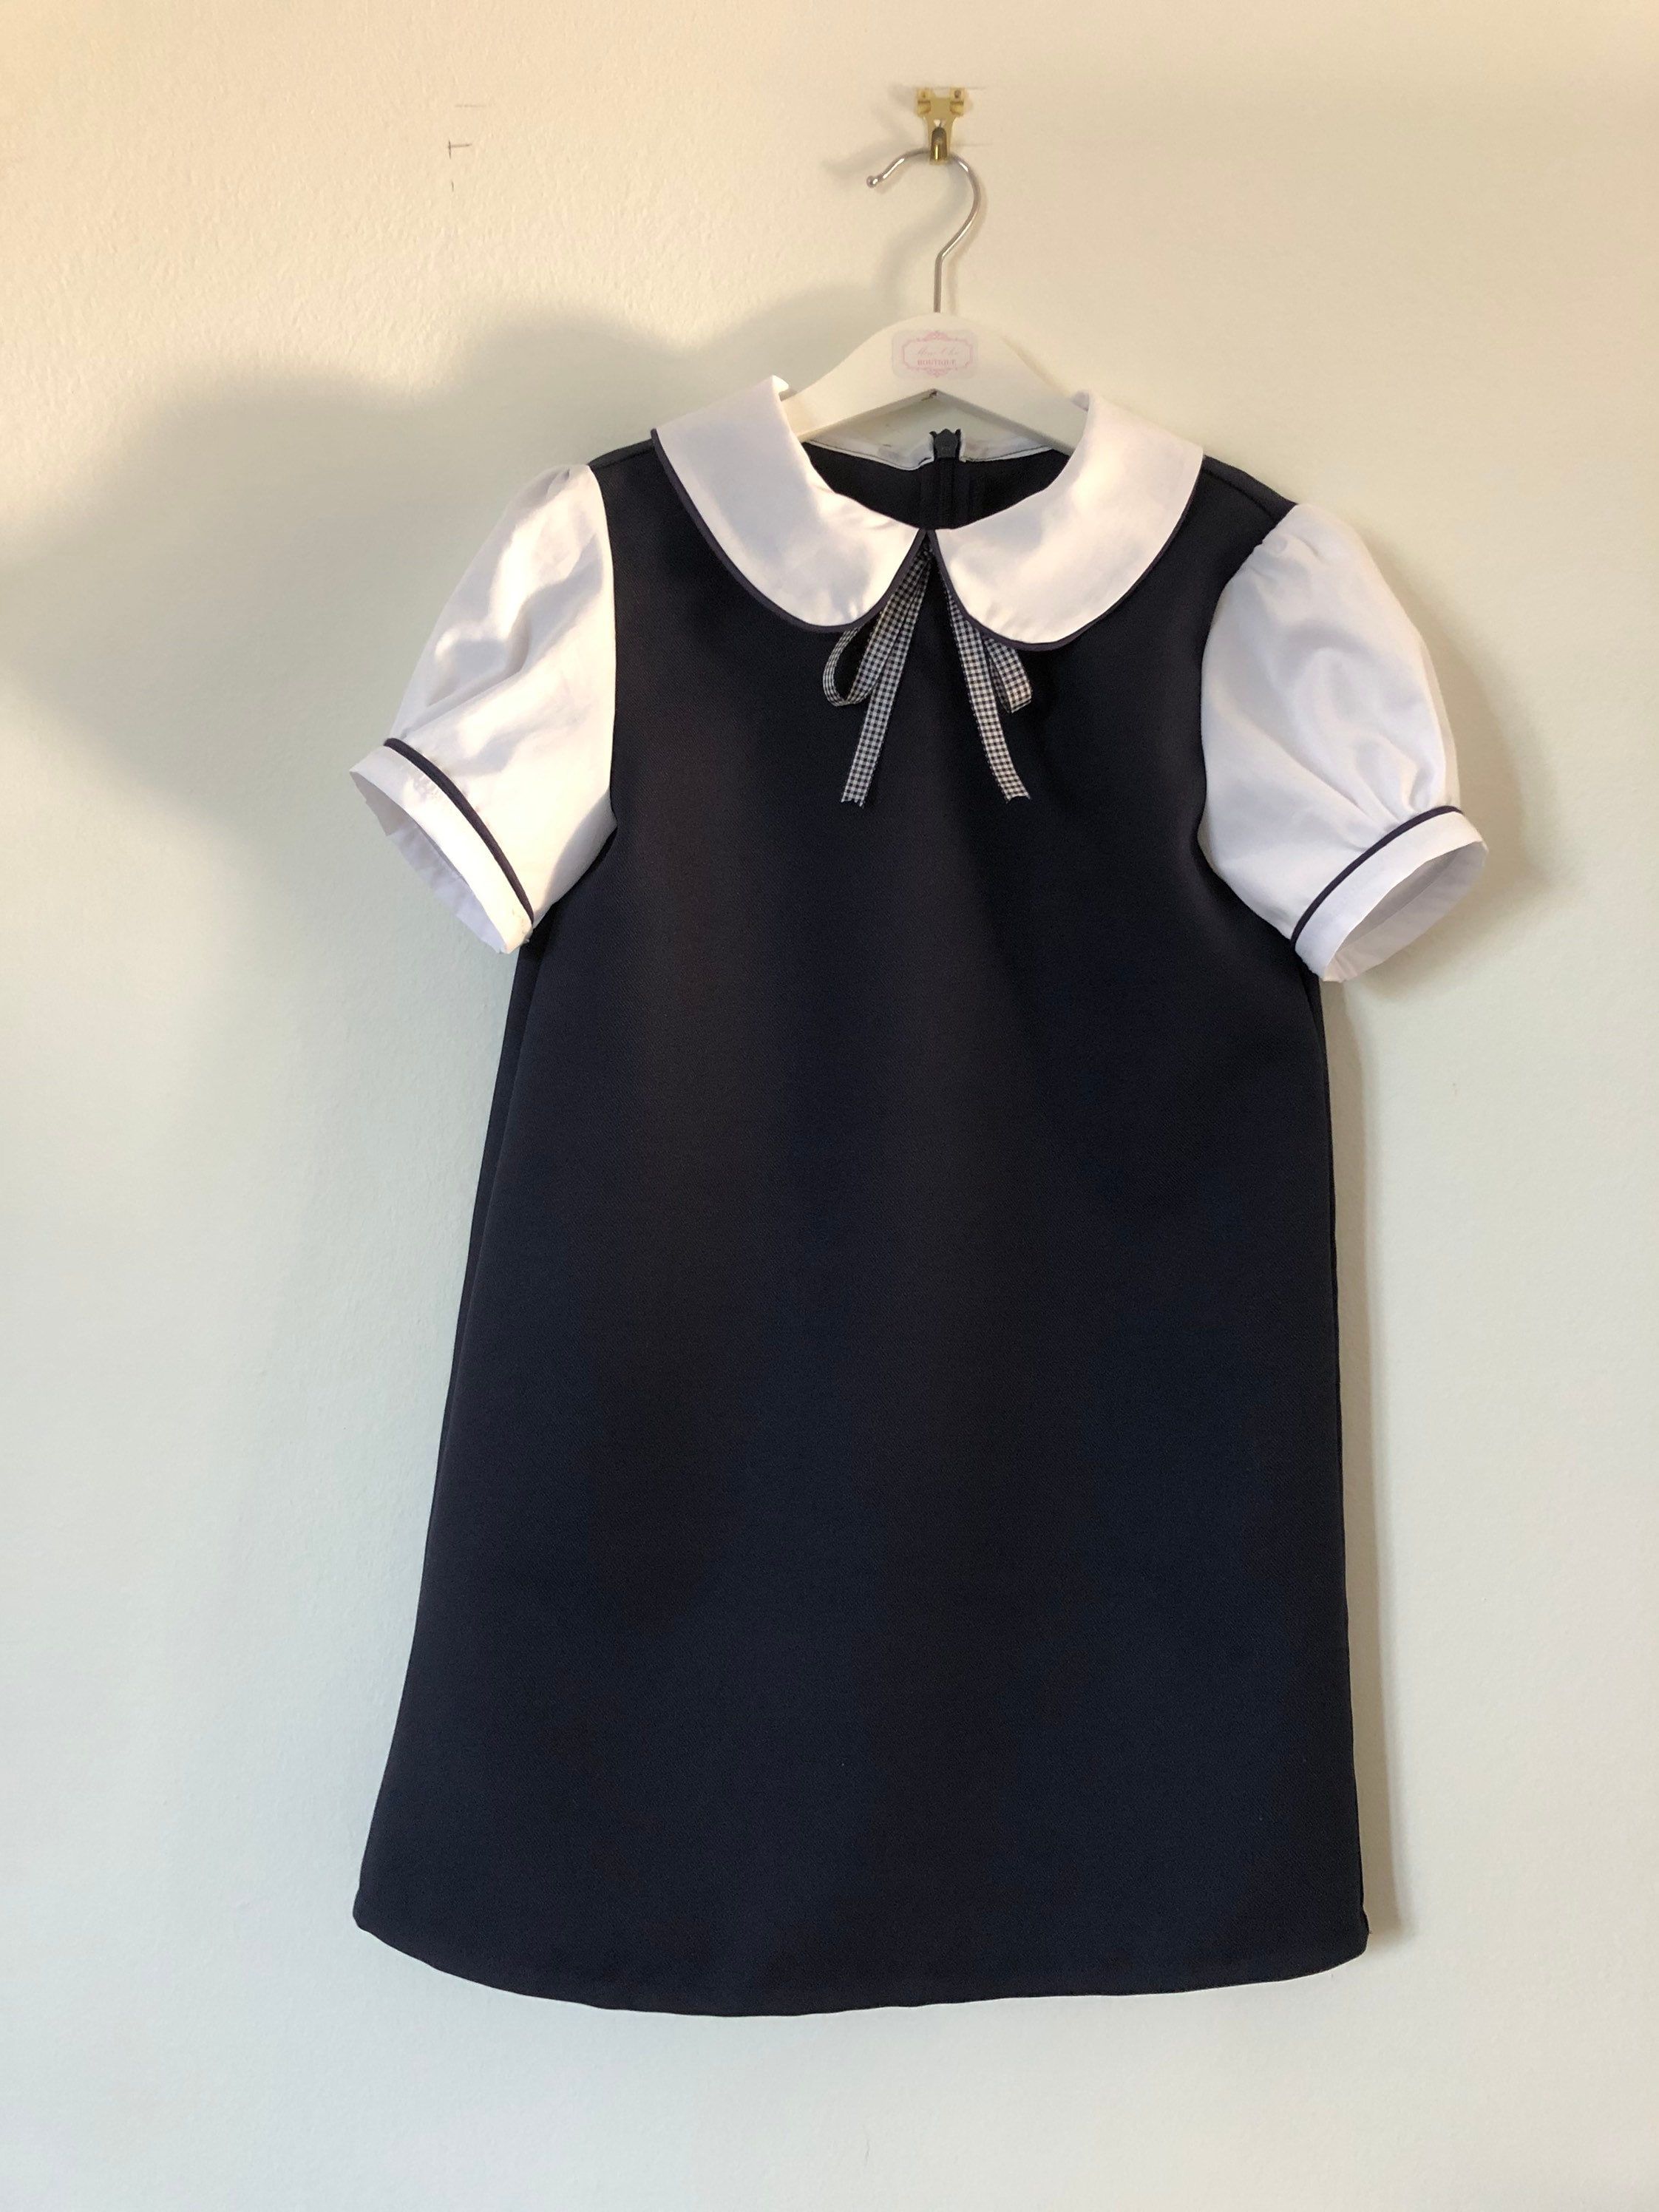 School Dress. School Uniform. Other Colours Available. up to | Etsy